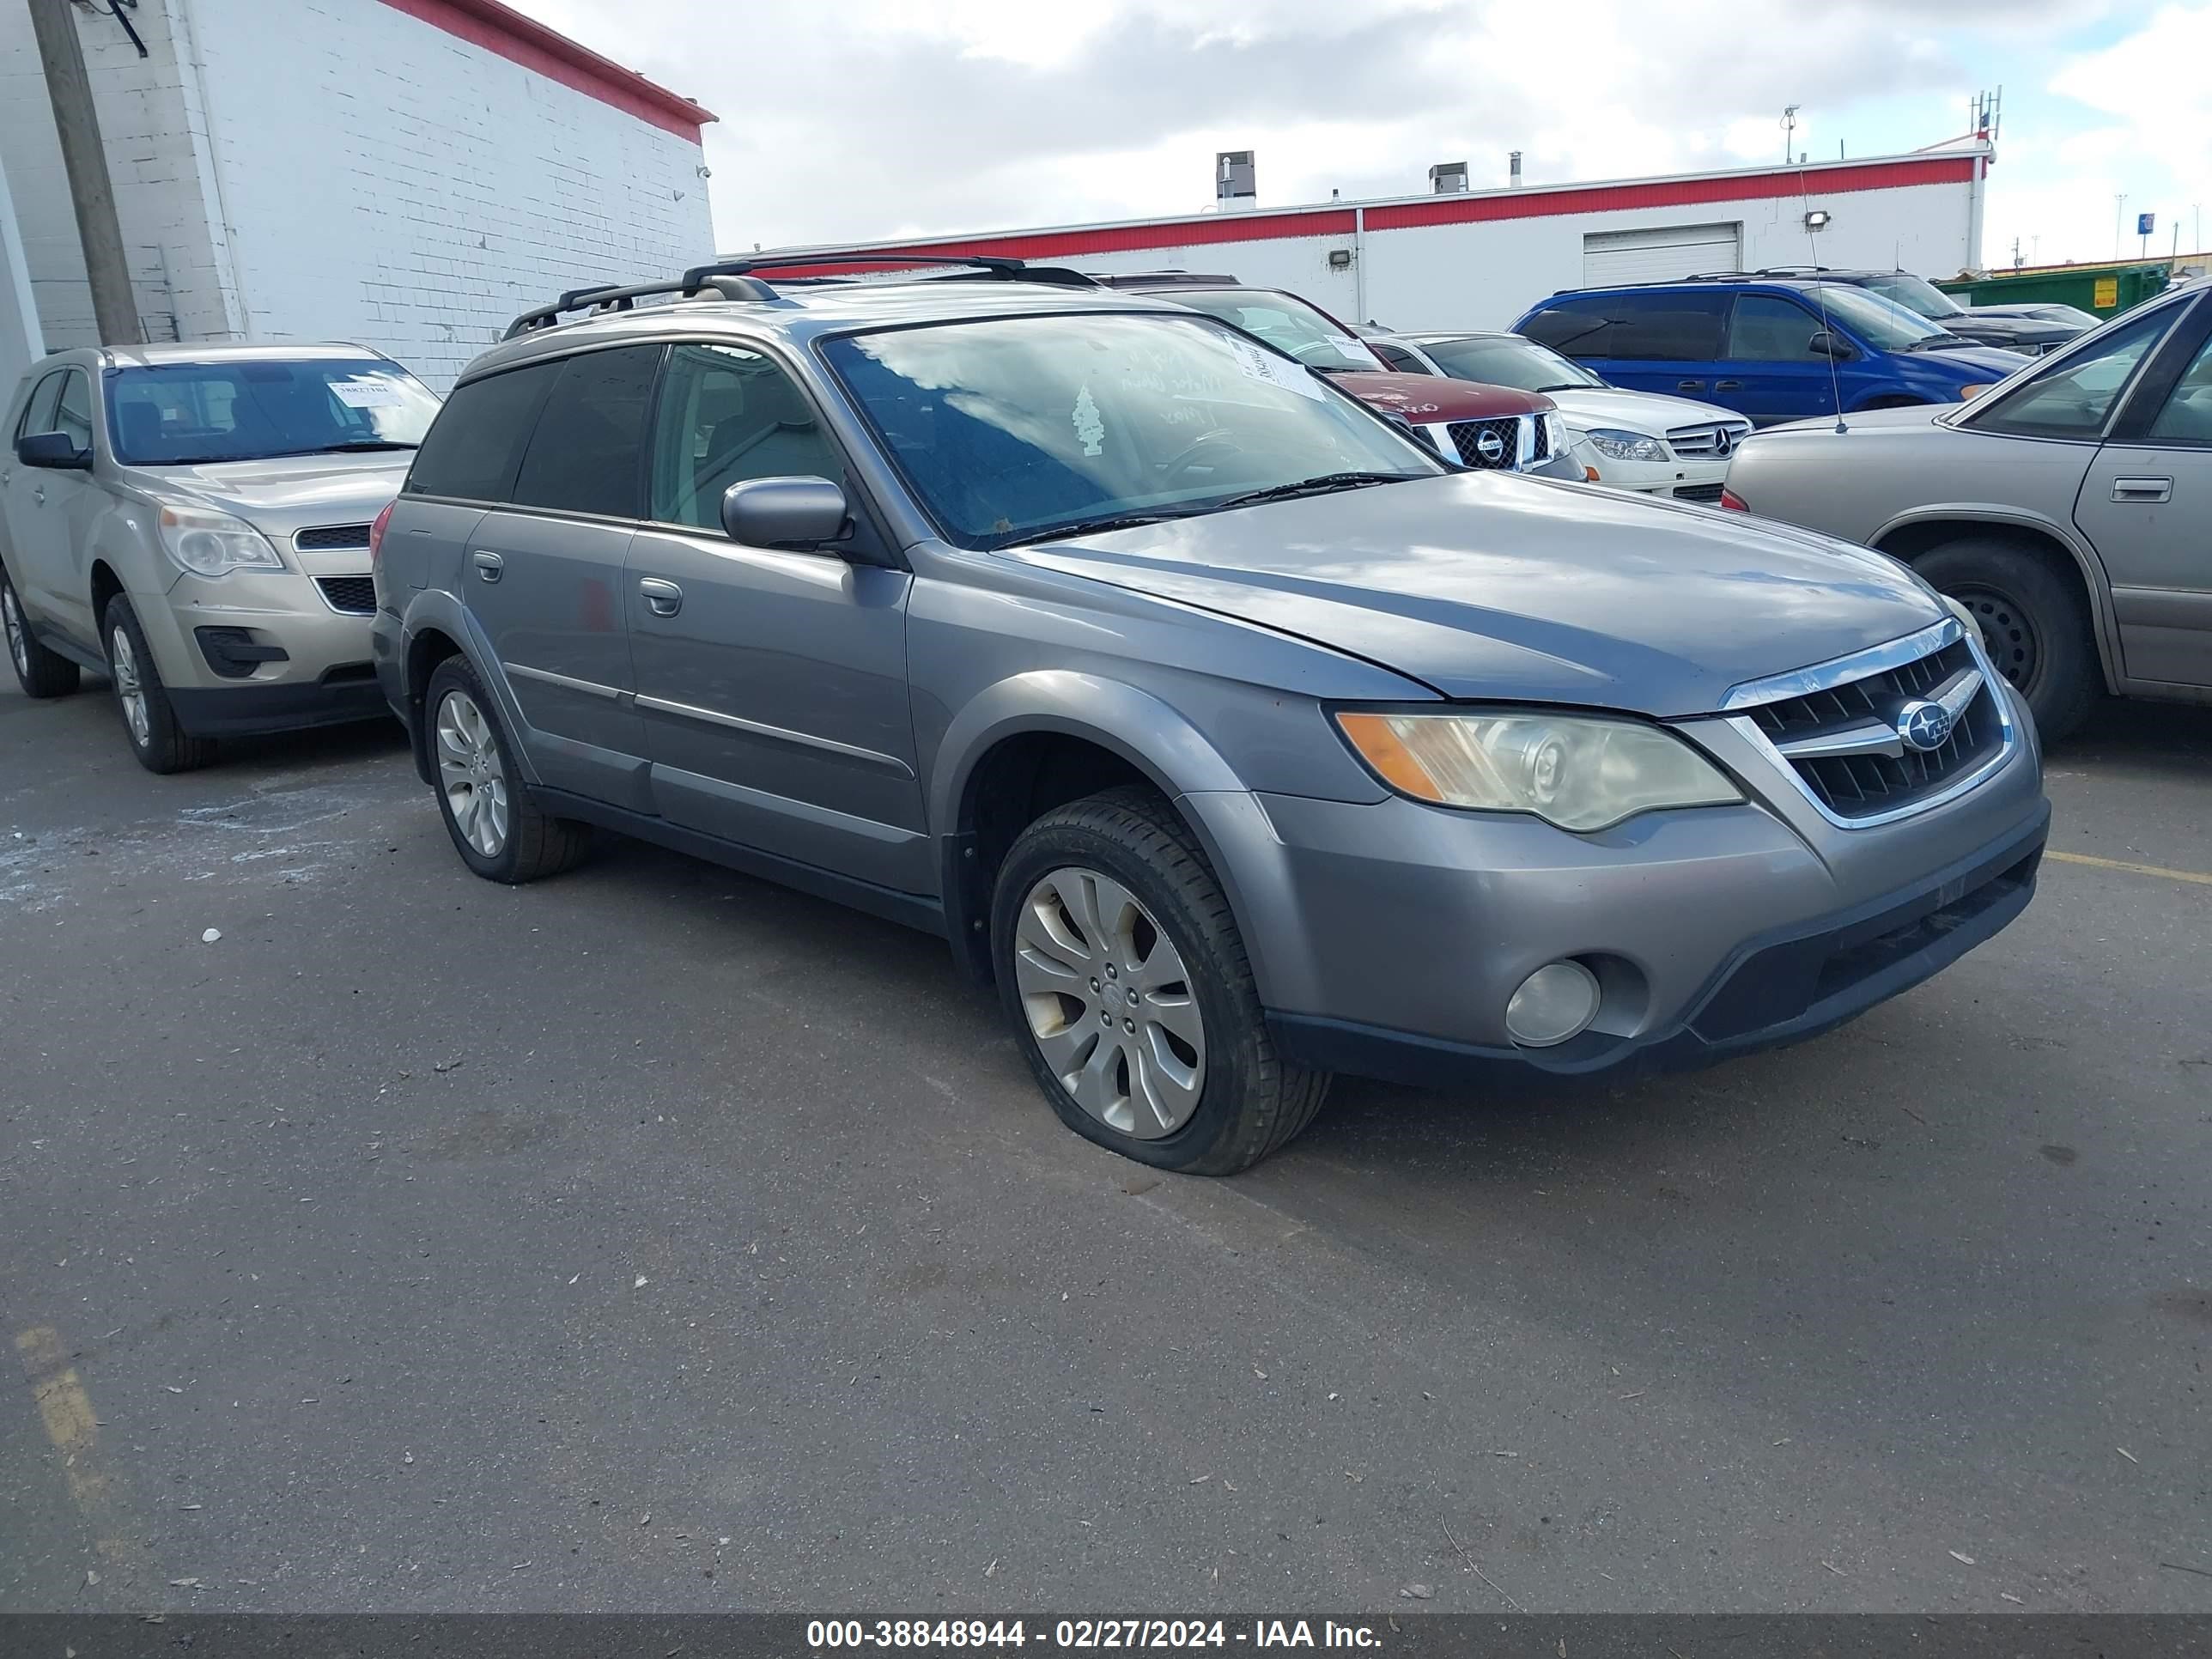 vin: 4S4BP66C097332965 4S4BP66C097332965 2009 subaru outback 2500 for Sale in 84401, 1800 South 1100 West, Ogden, USA